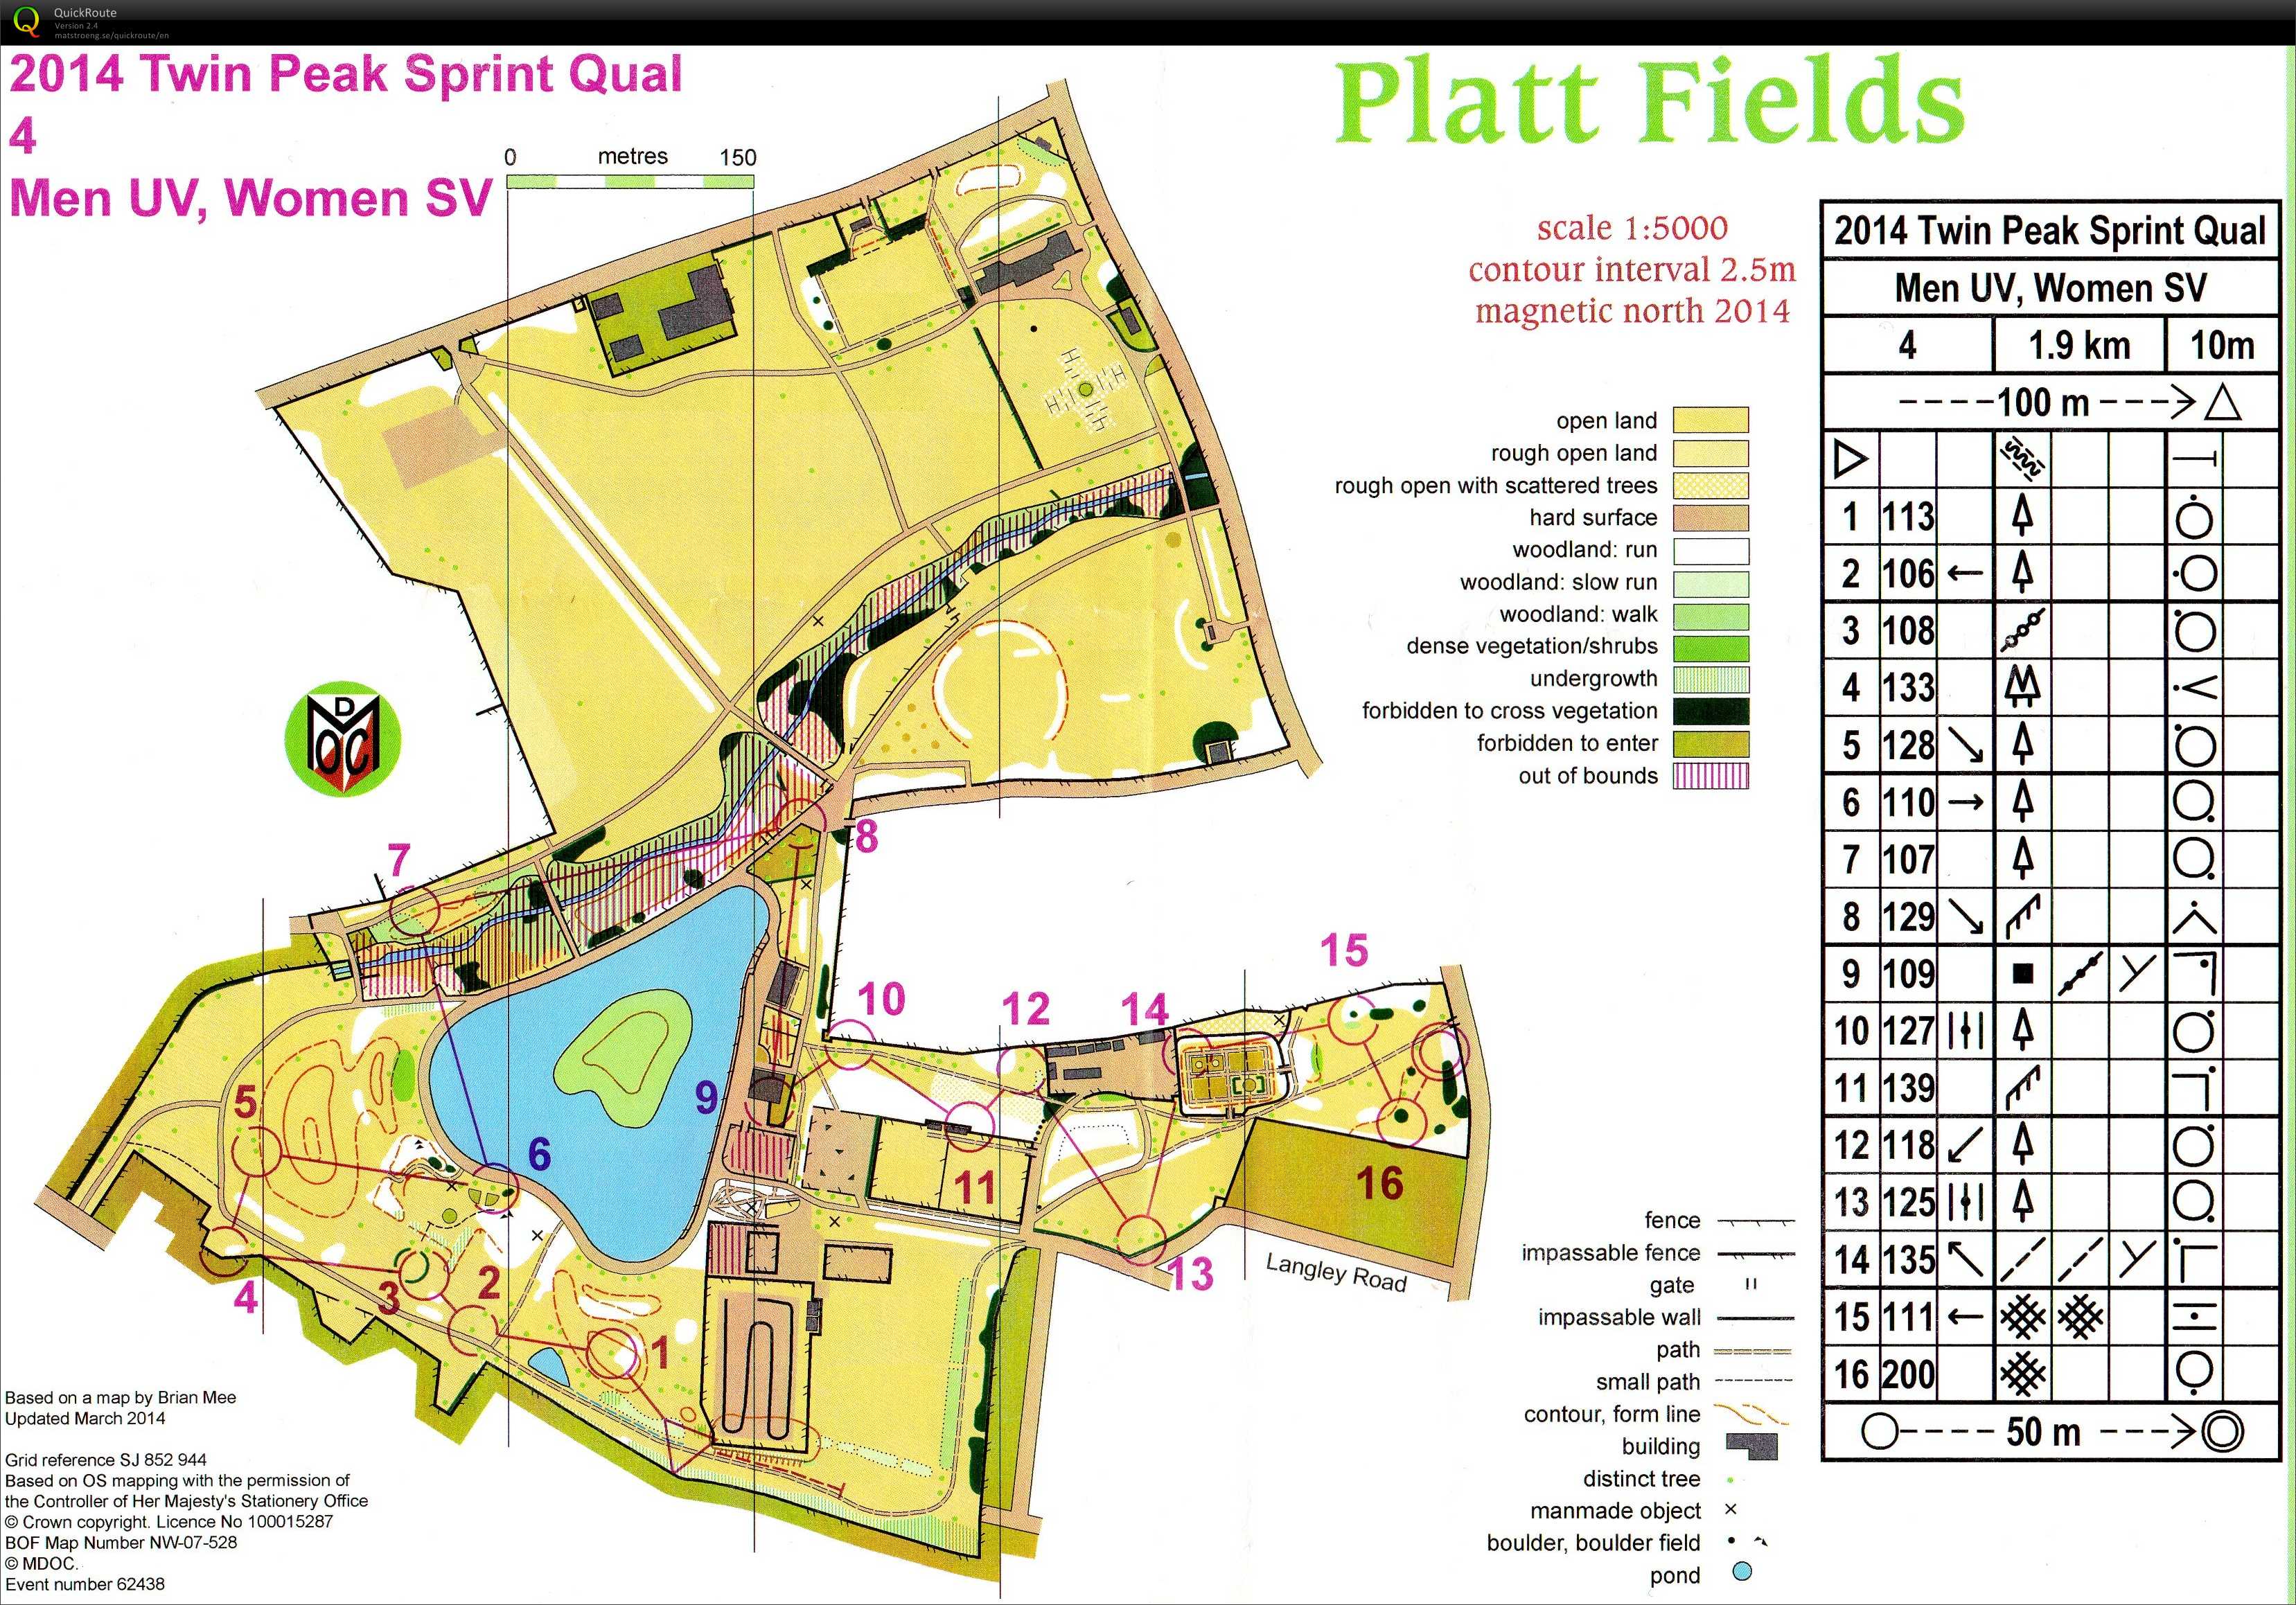 North-West Sprint Championships - Prologue (14.06.2014)